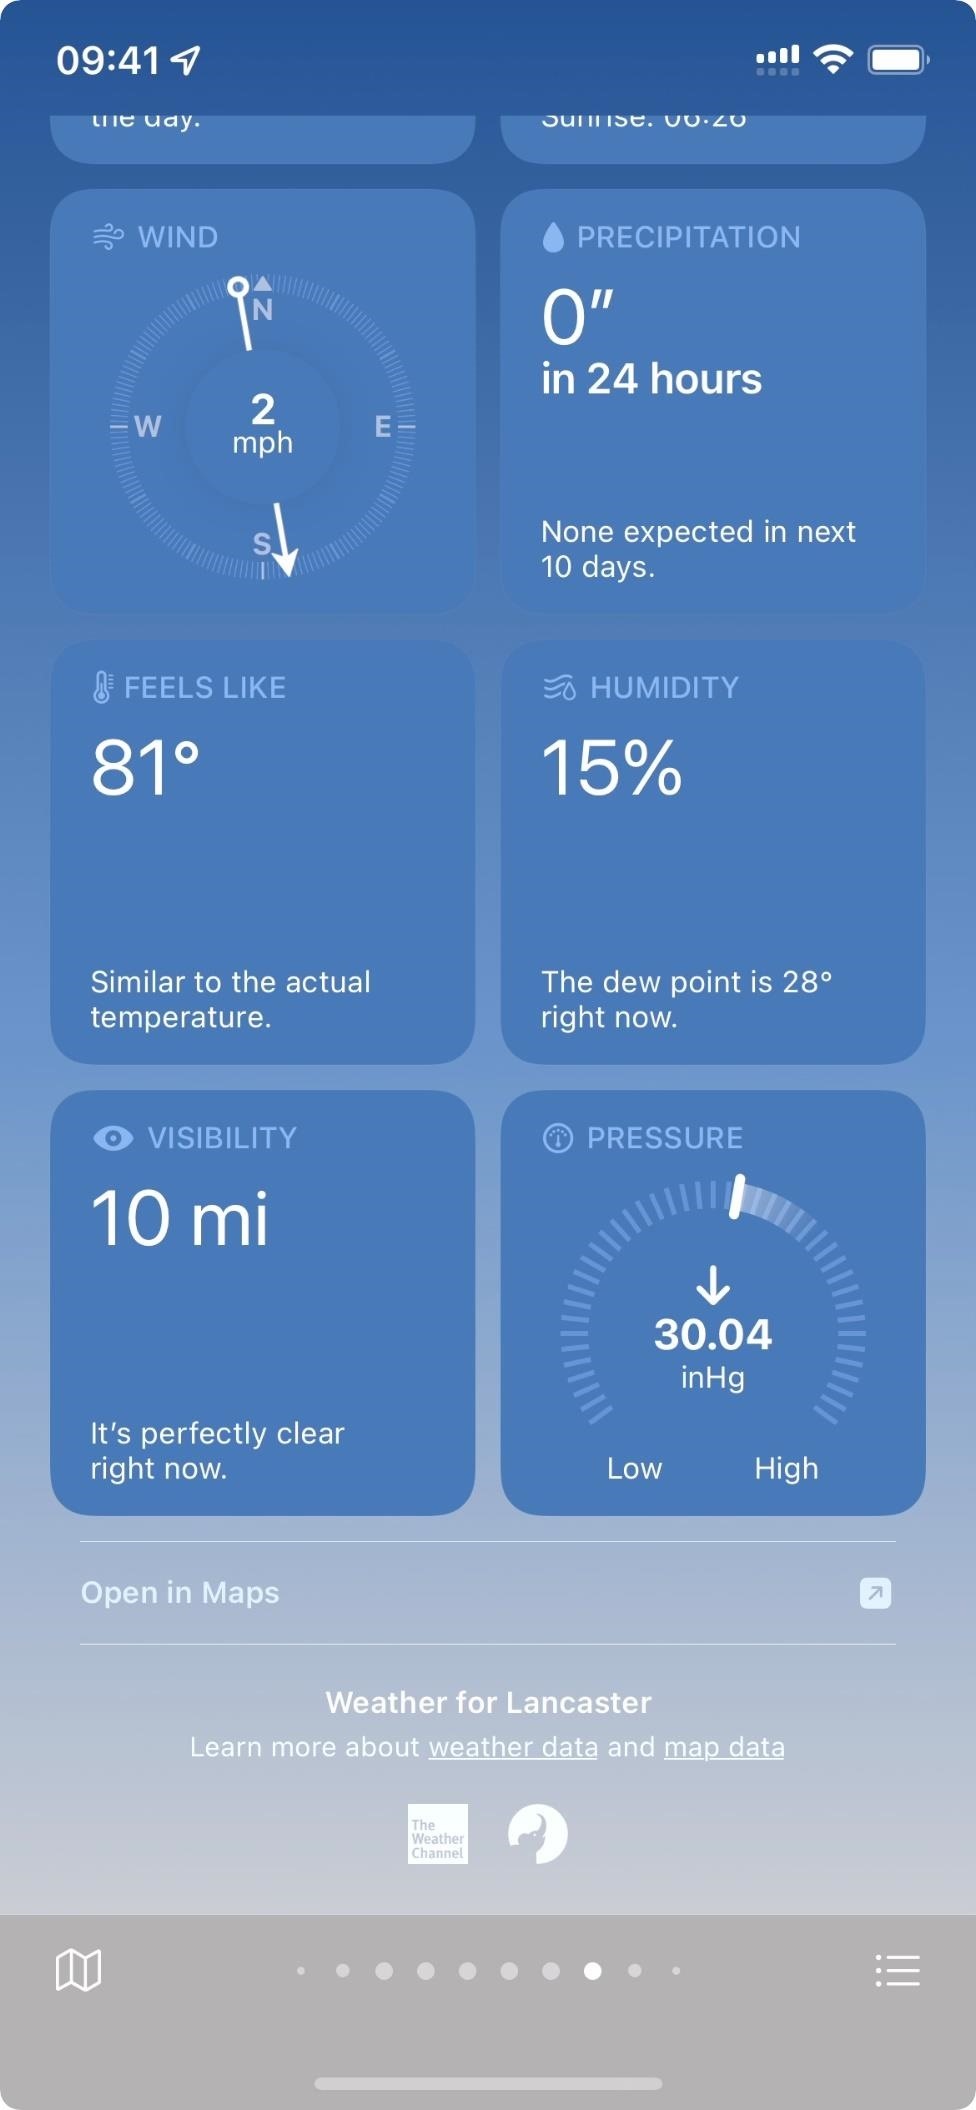 16 Ways to Customize Your iPhone's Weather App (Yes, There Are Really 16 Things You Can Tweak)